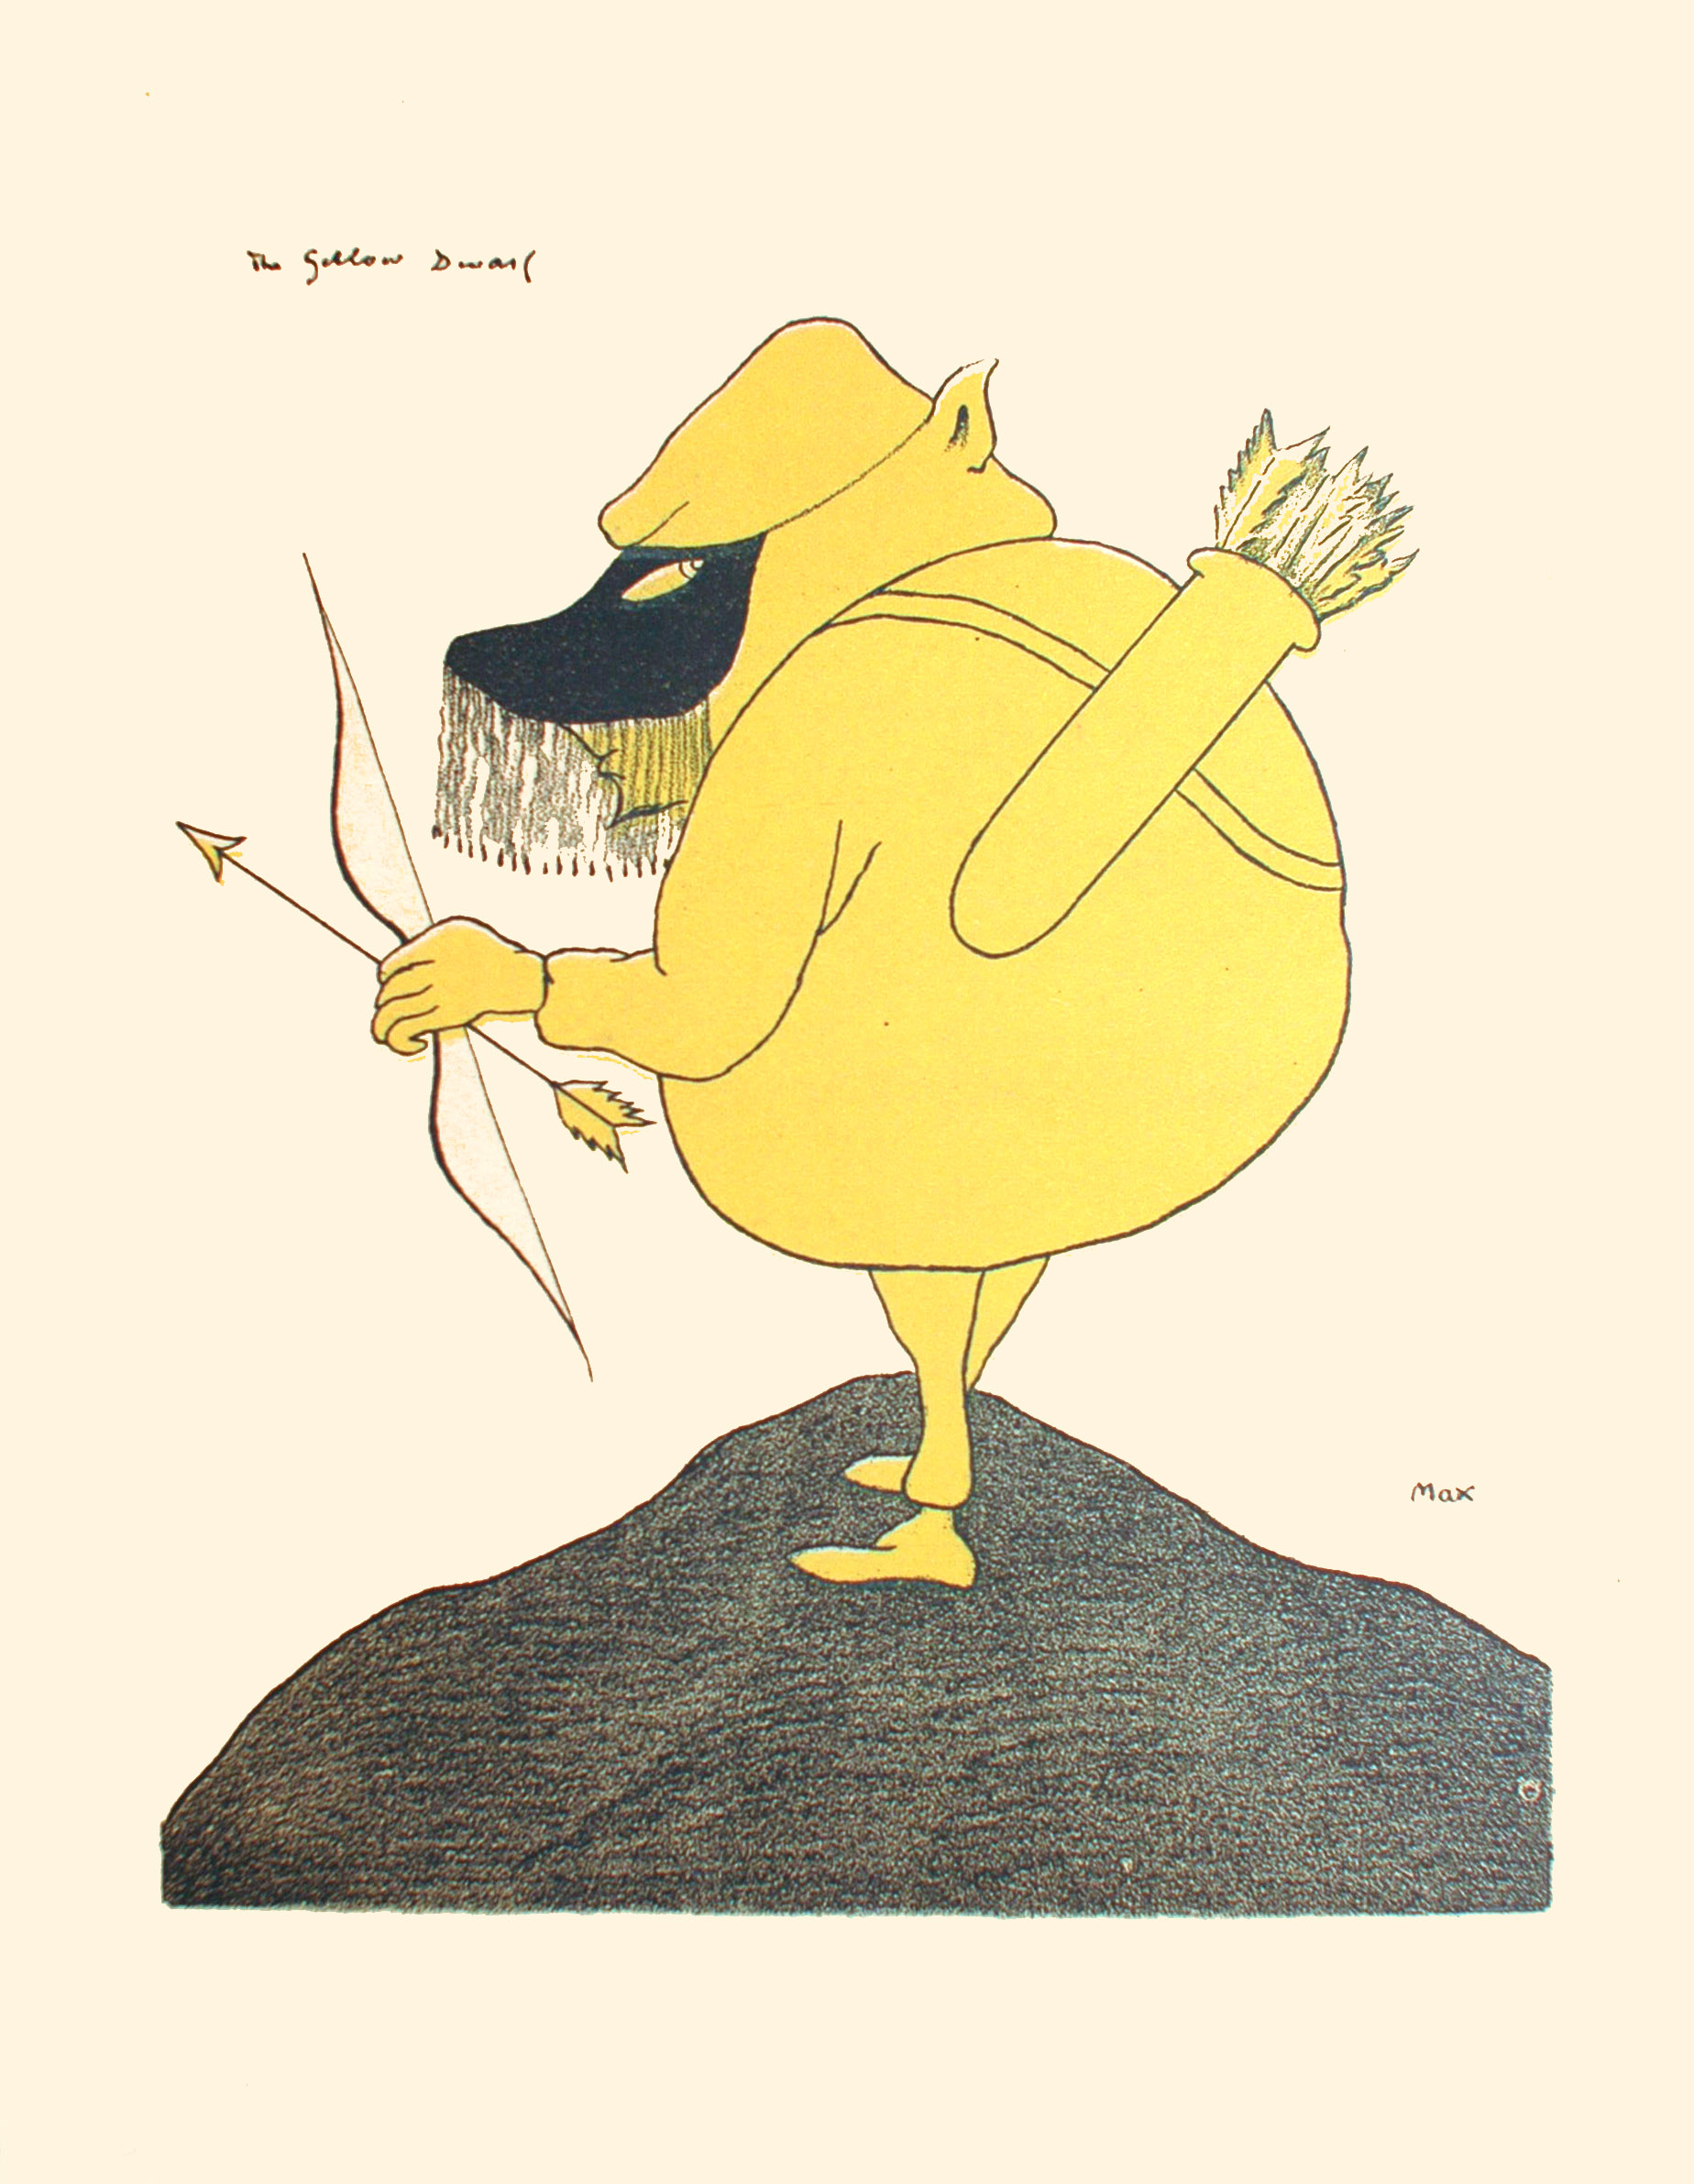 Image is of a pudgy dwarf clad completely in yellow with yellow skin He is wearing a black mask that covers his eyes it has a black fringe on it He is shown in profile looking upward behind him. The man has a quiver with some arrows in it strapped on his back His left hand holds a bow and a single arrow He is standing on top of a hill The background is open and undefined The image s title The Yellow Dwarf is written in the upper left hand corner the artist’s name MAX is on the lower right hand side The image is printed on yellowed paper The image is vertically displayed